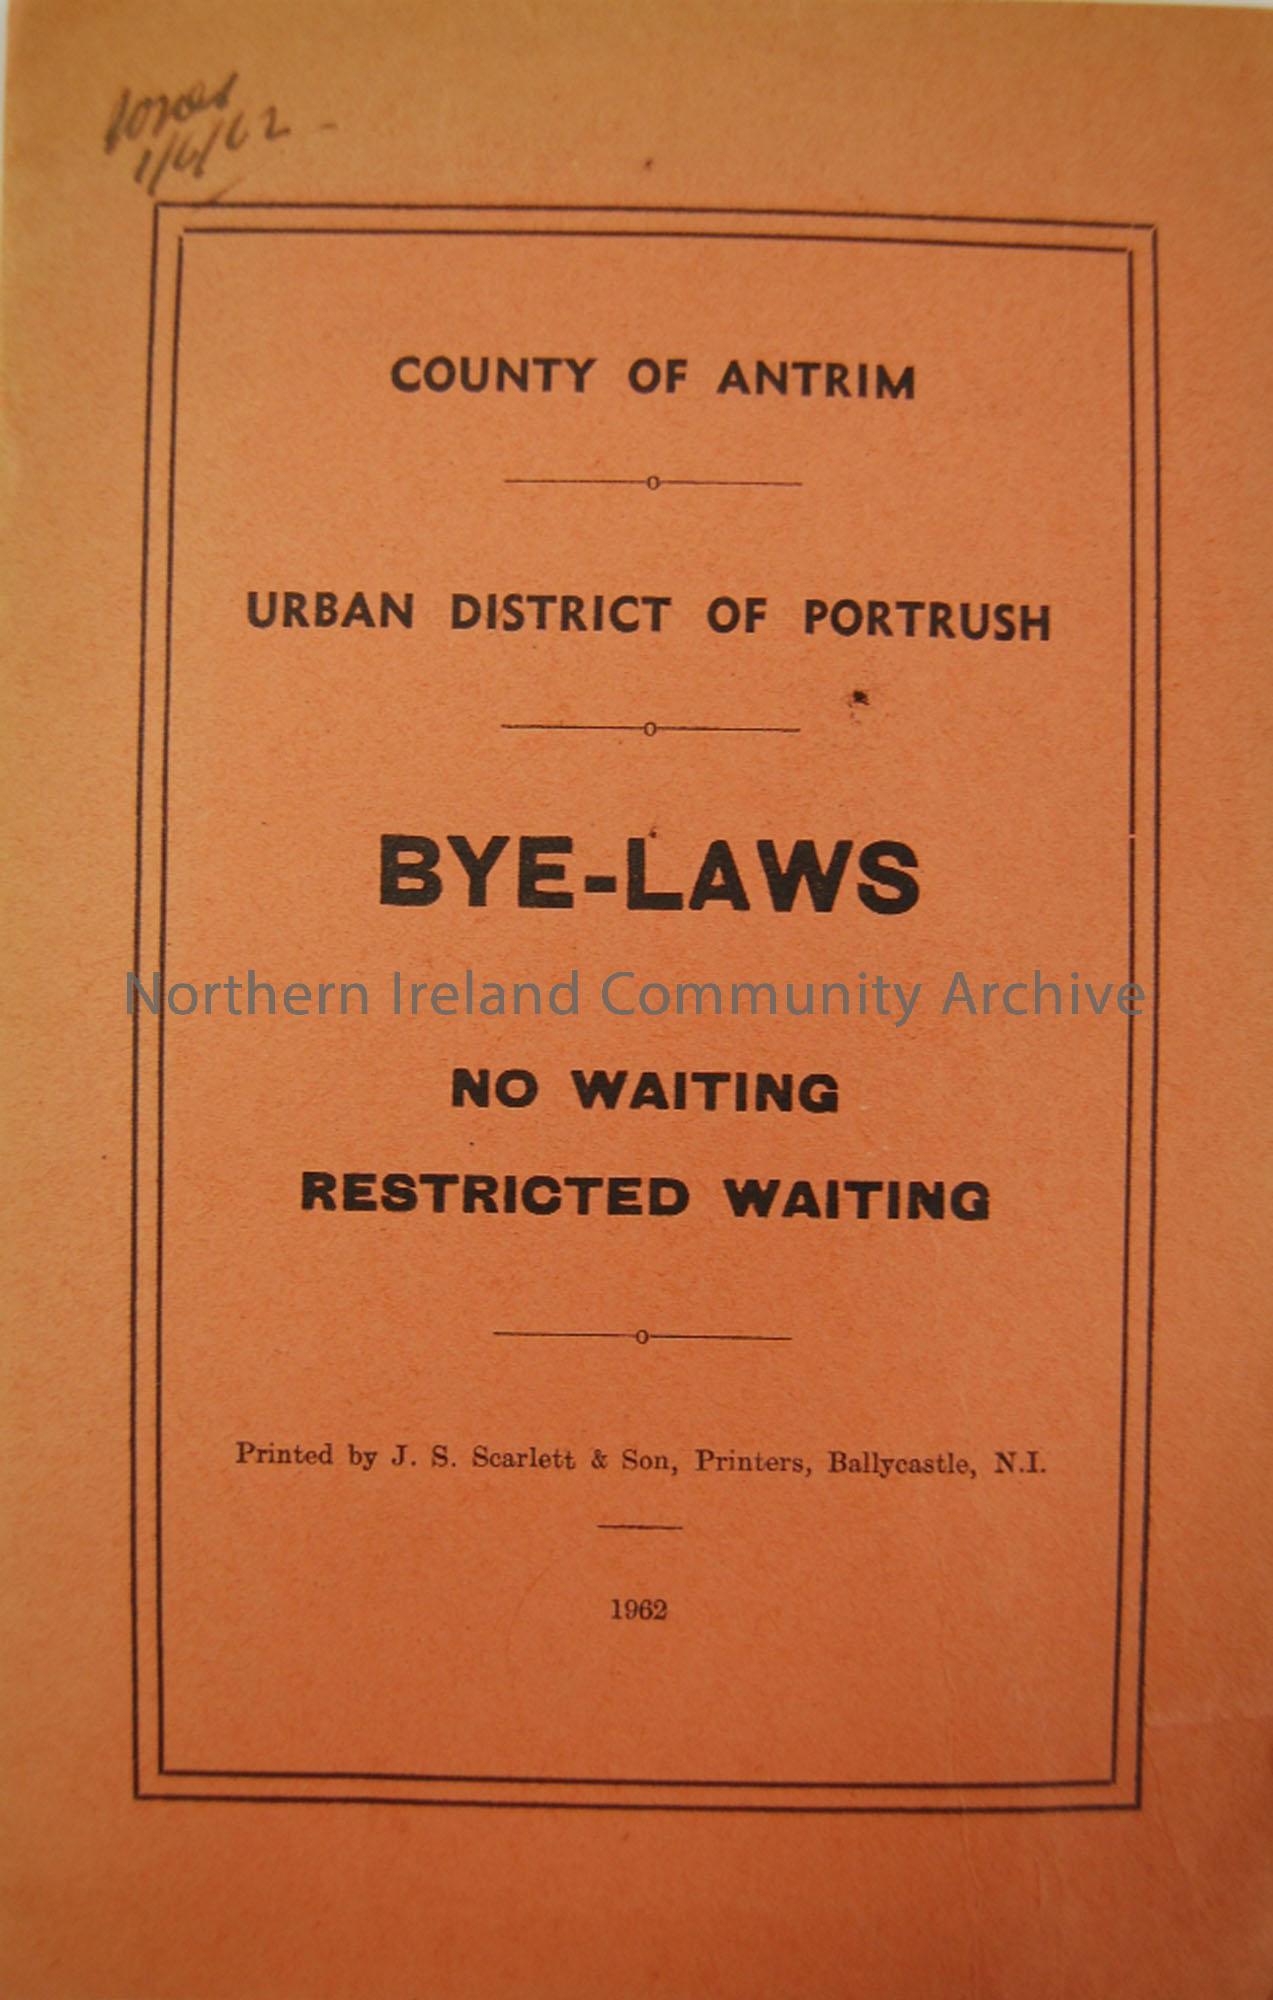 County of Antrim, Urban District of Portrush, Bye-Laws. No waiting, restricted waiting. 1962